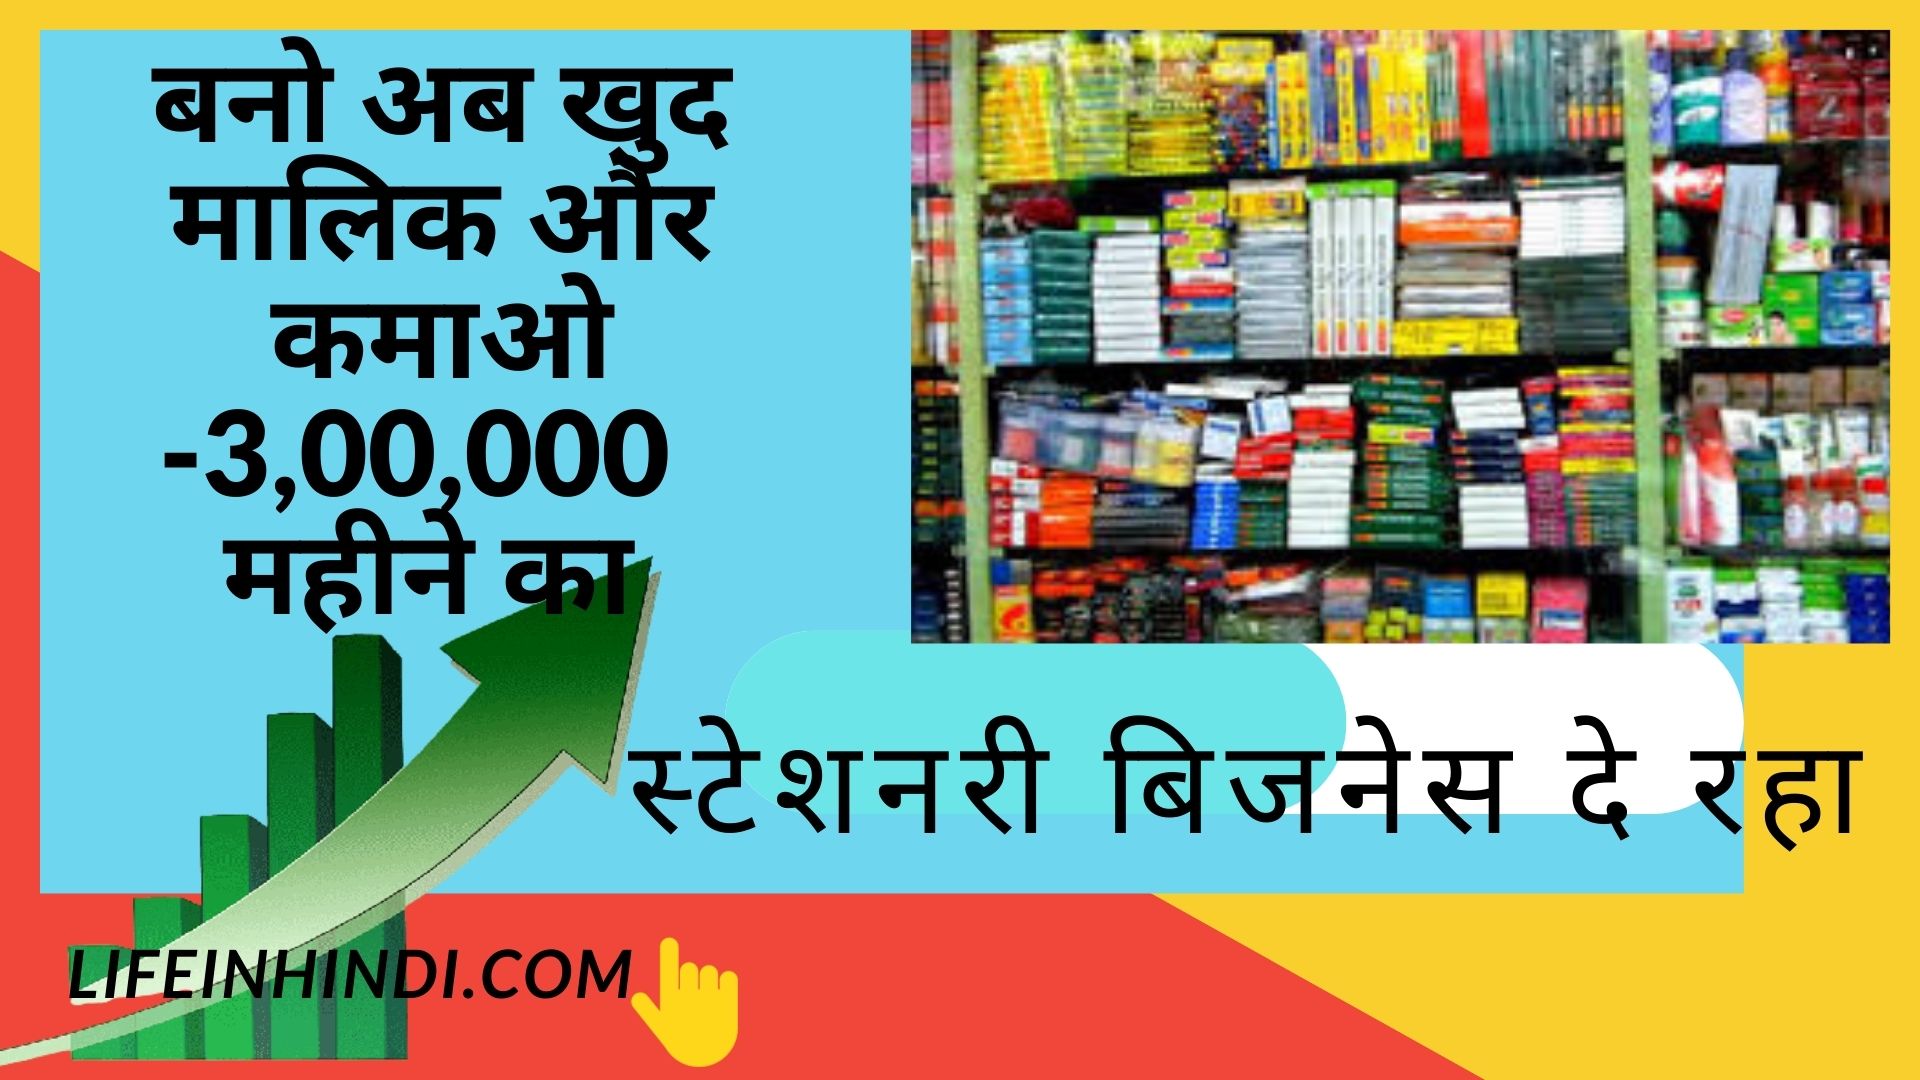 Stationery Business Most profitable -Earn 5 lakh per month